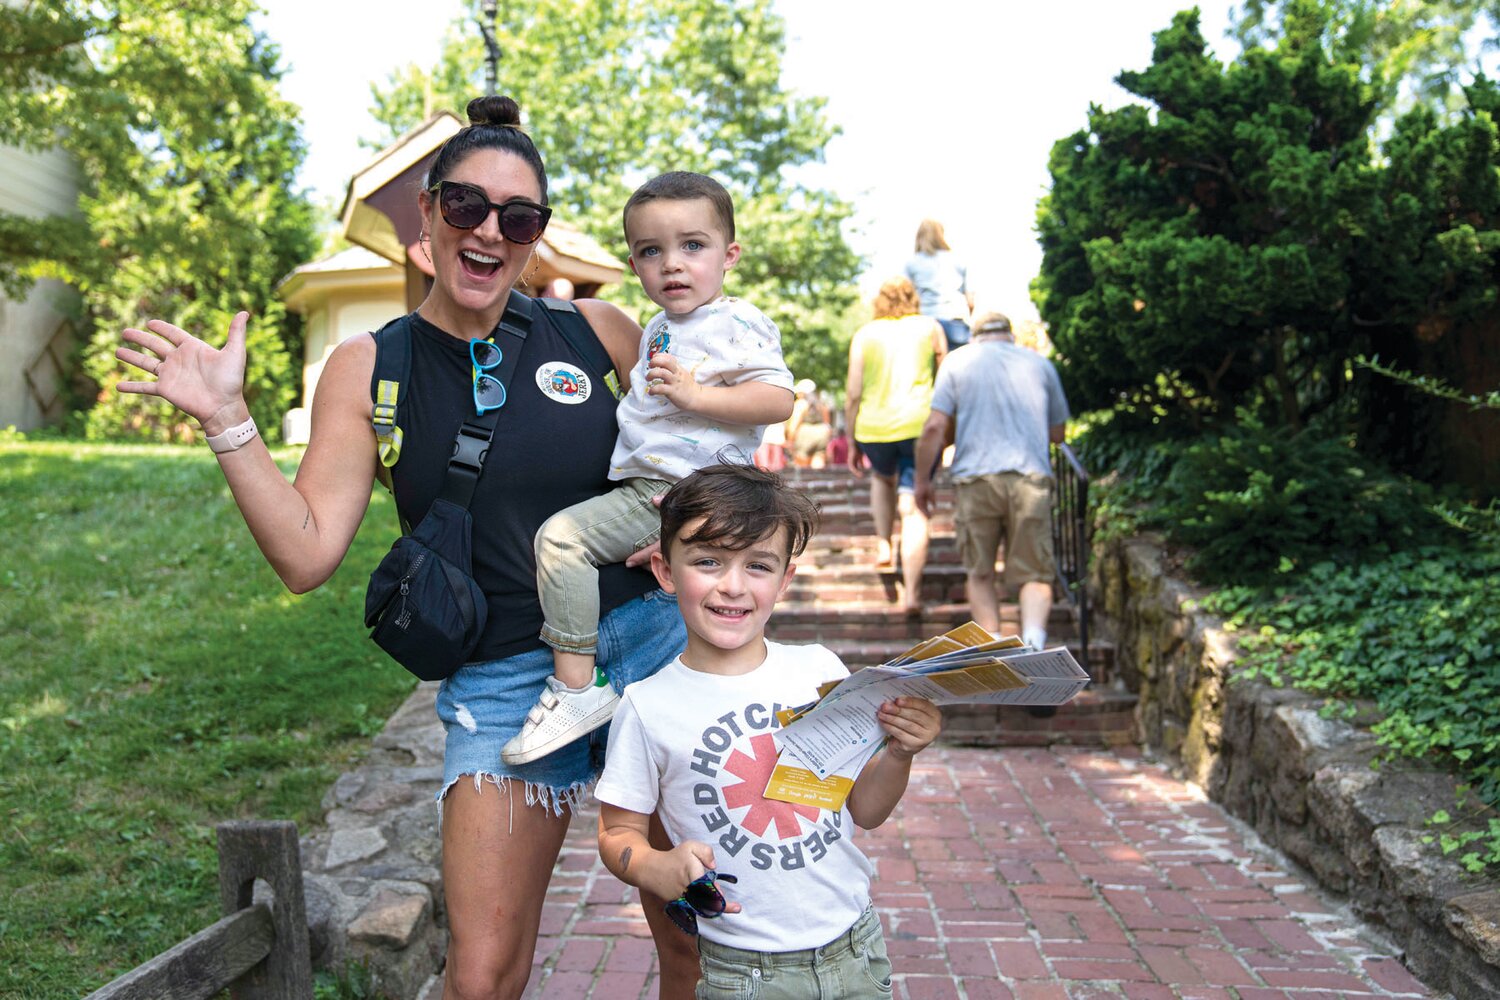 Susie Mutter and her two children, Bowle and Frankie, attend Peddler’s Village’s Peach Festival.